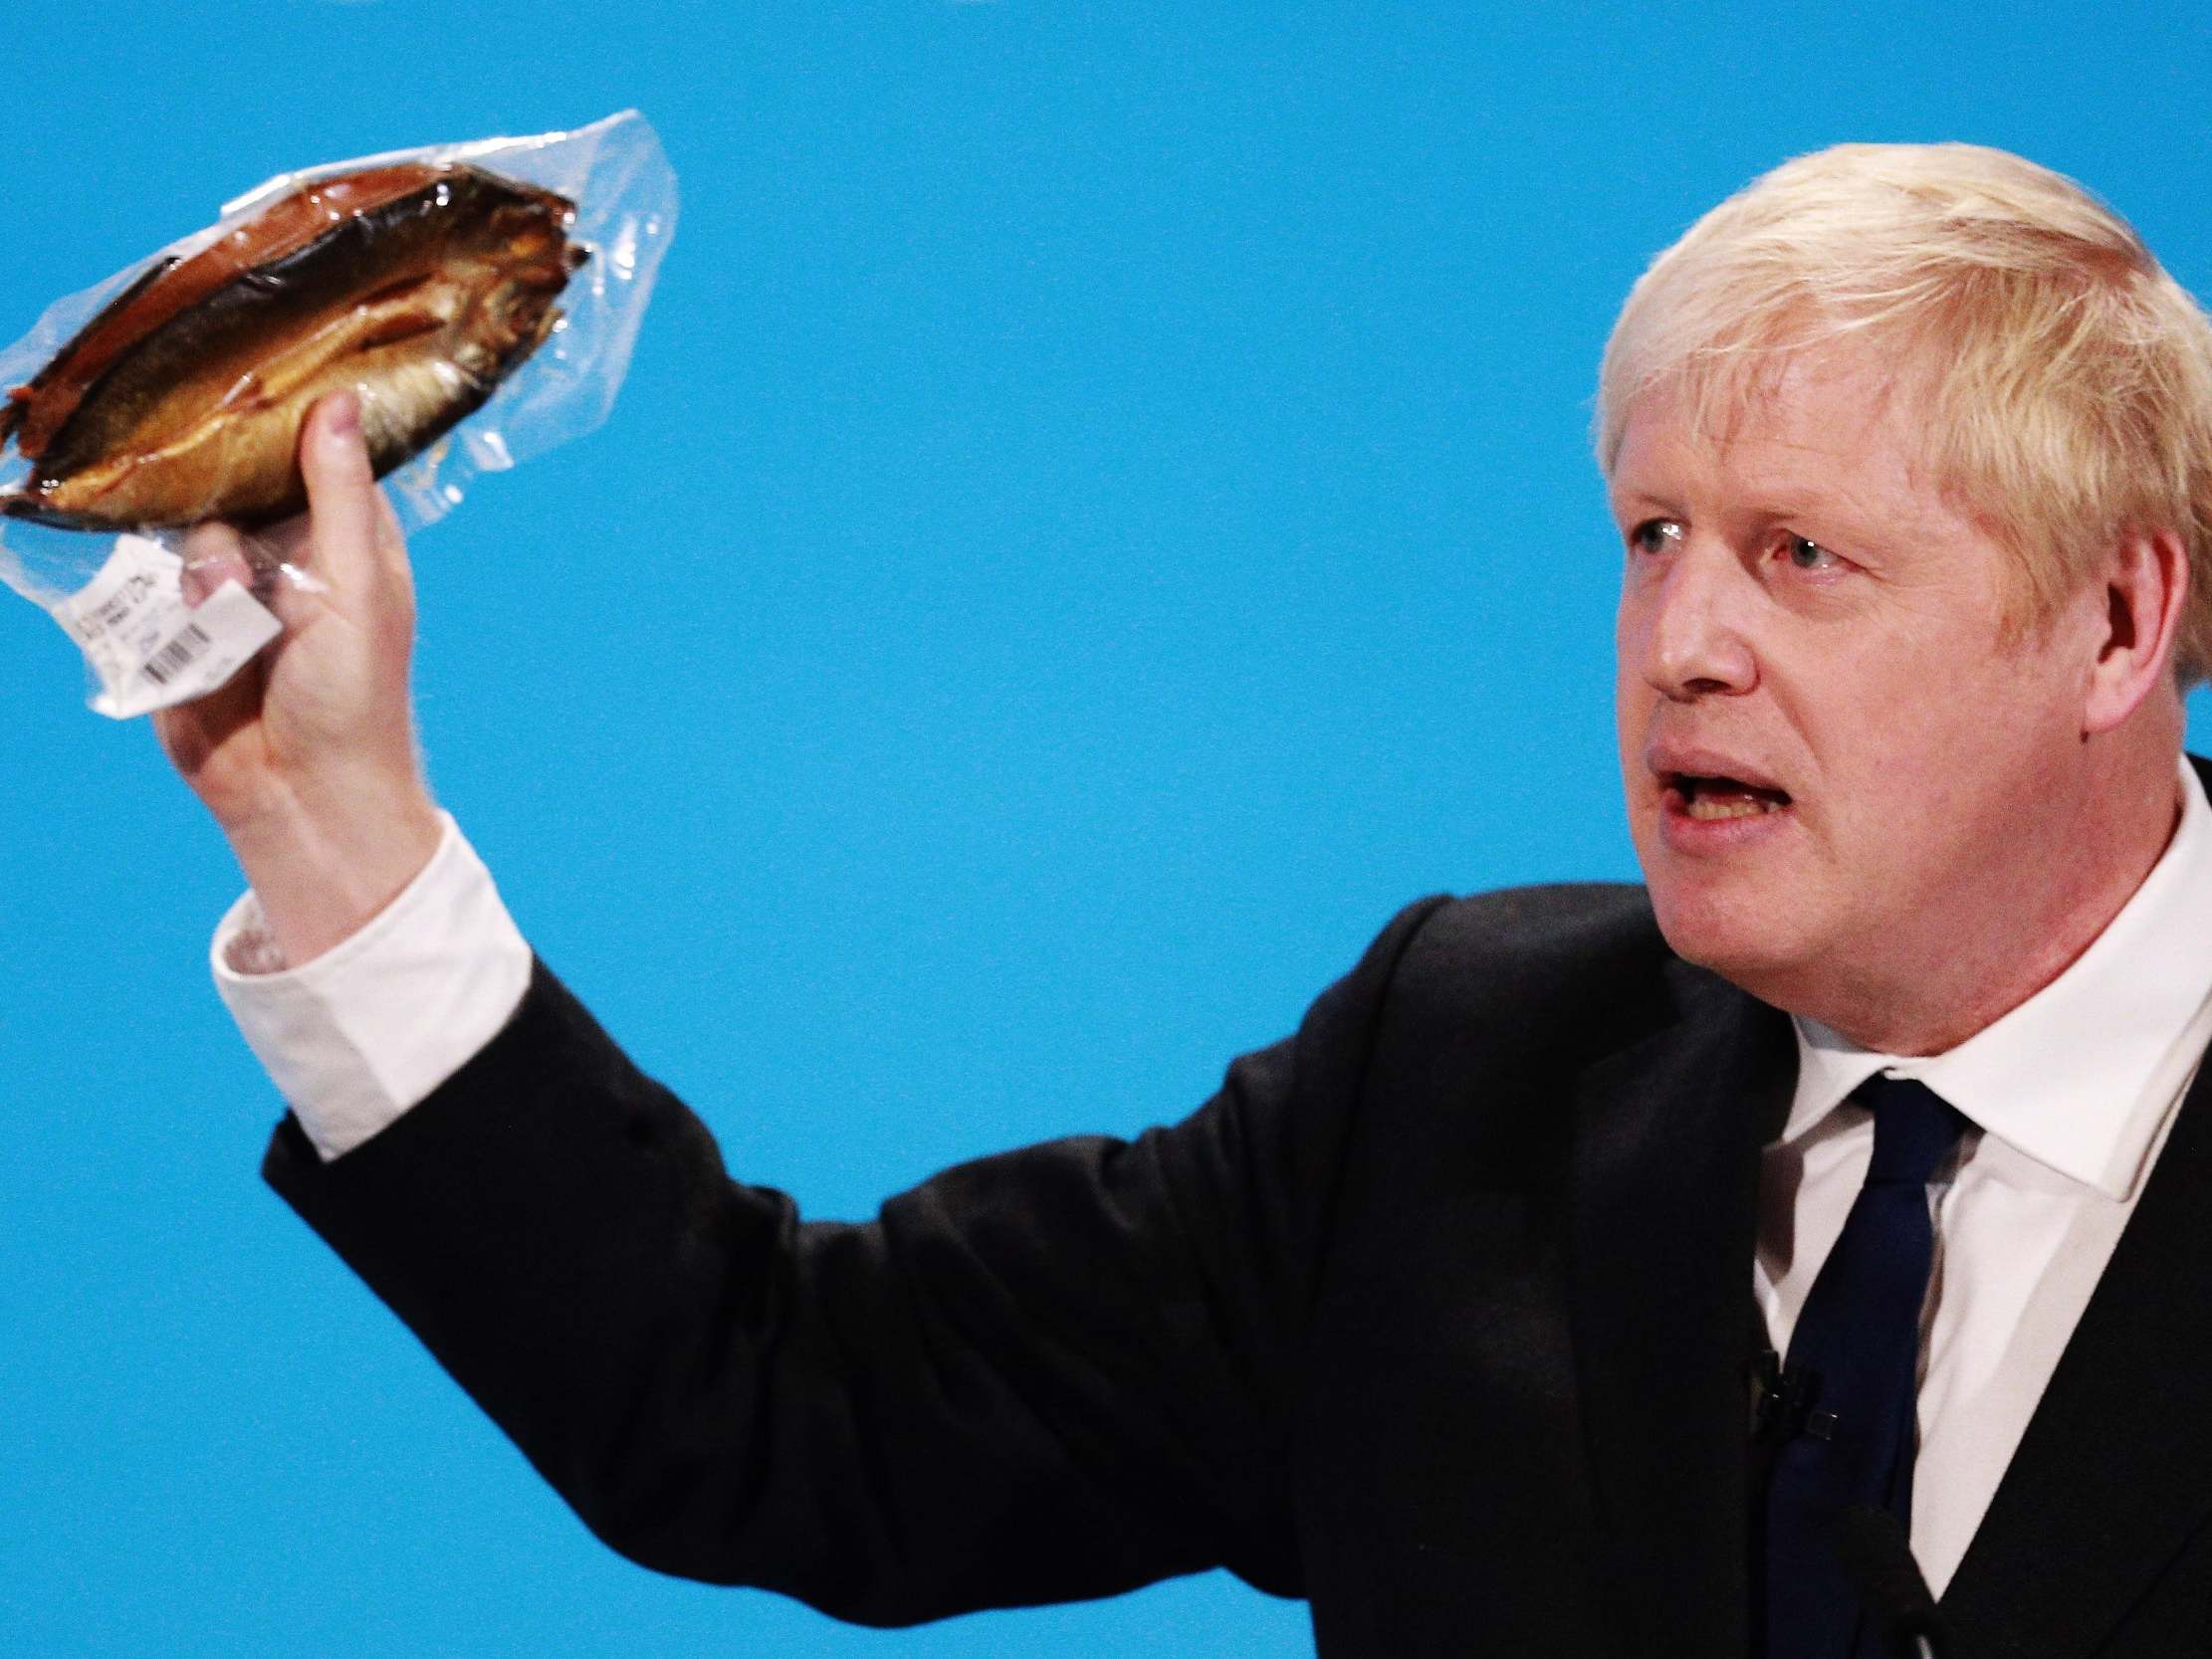 Holding a kipper at the final hustings of the Conservative leadership campaign in July, 2019